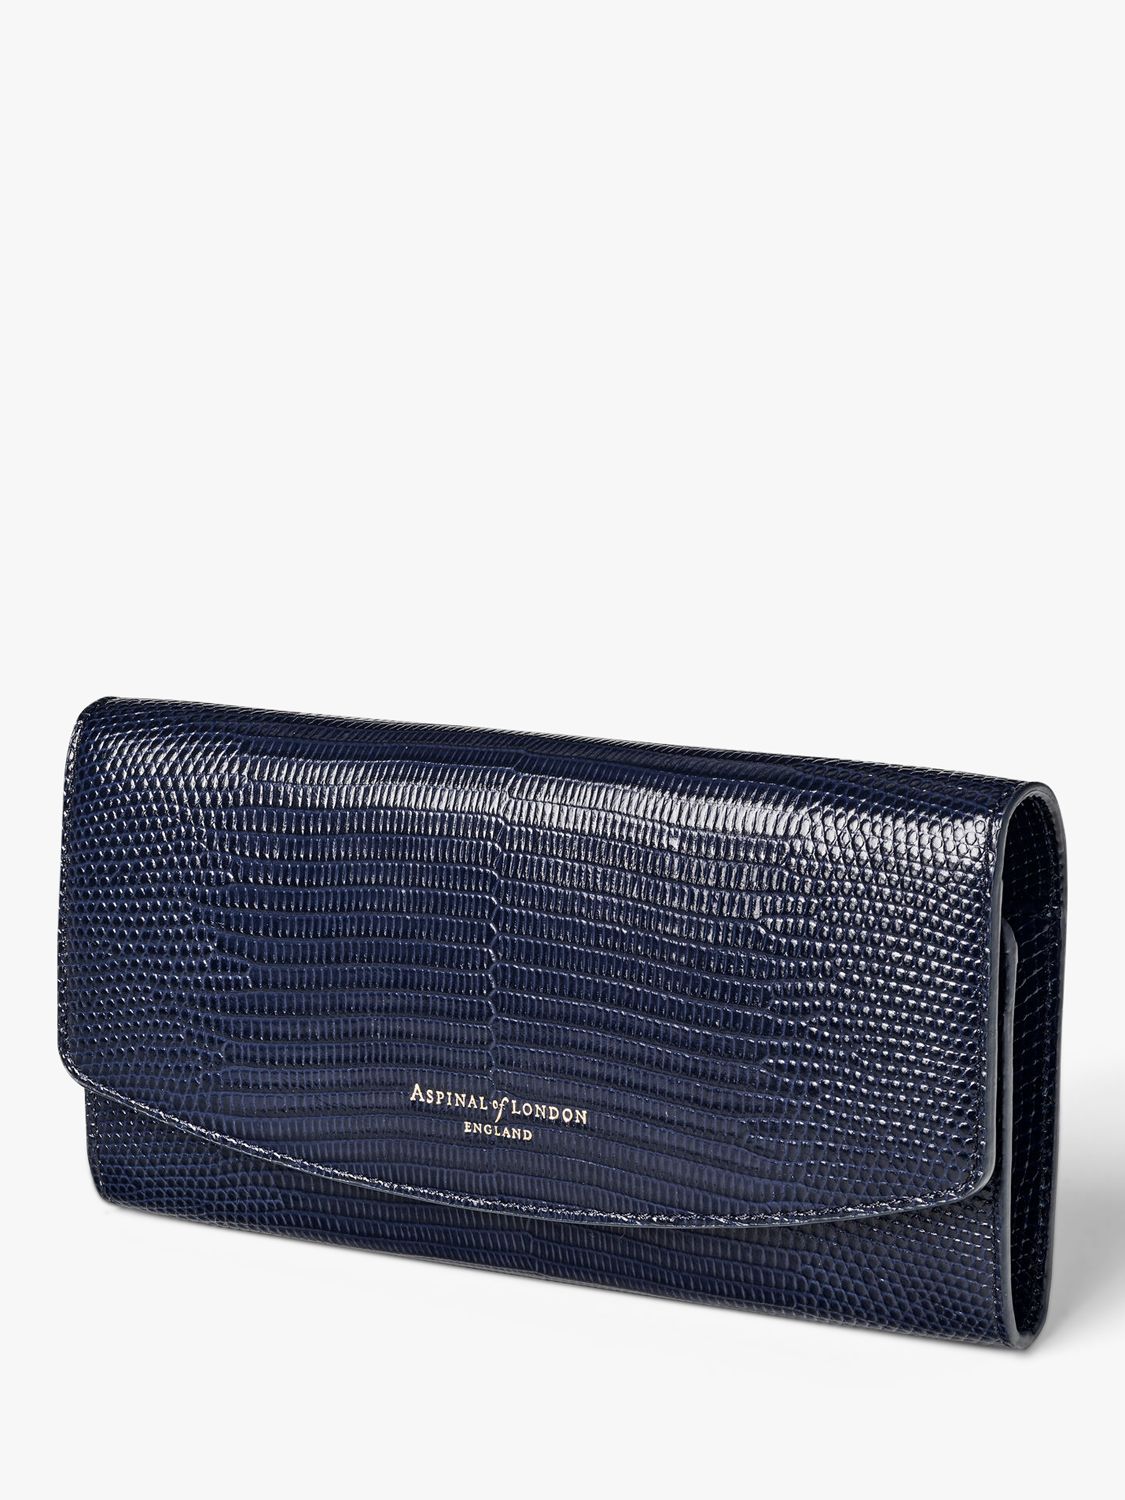 Buy Aspinal of London Leather Madison Purse Online at johnlewis.com